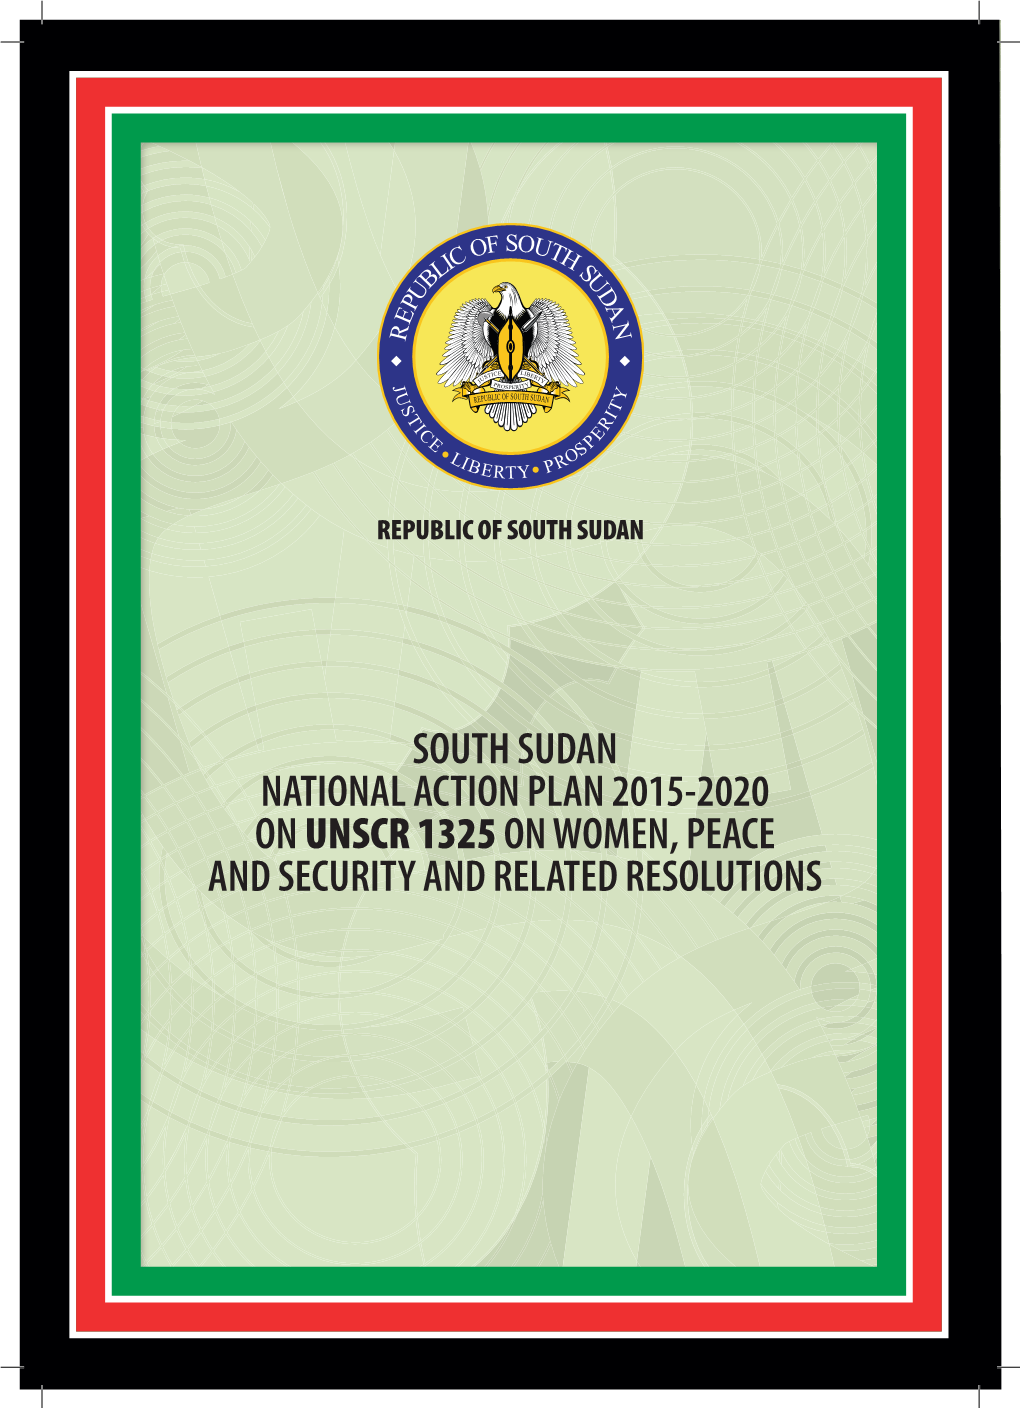 South Sudan National Action Plan 2015-2020 on Unscr 1325On Women